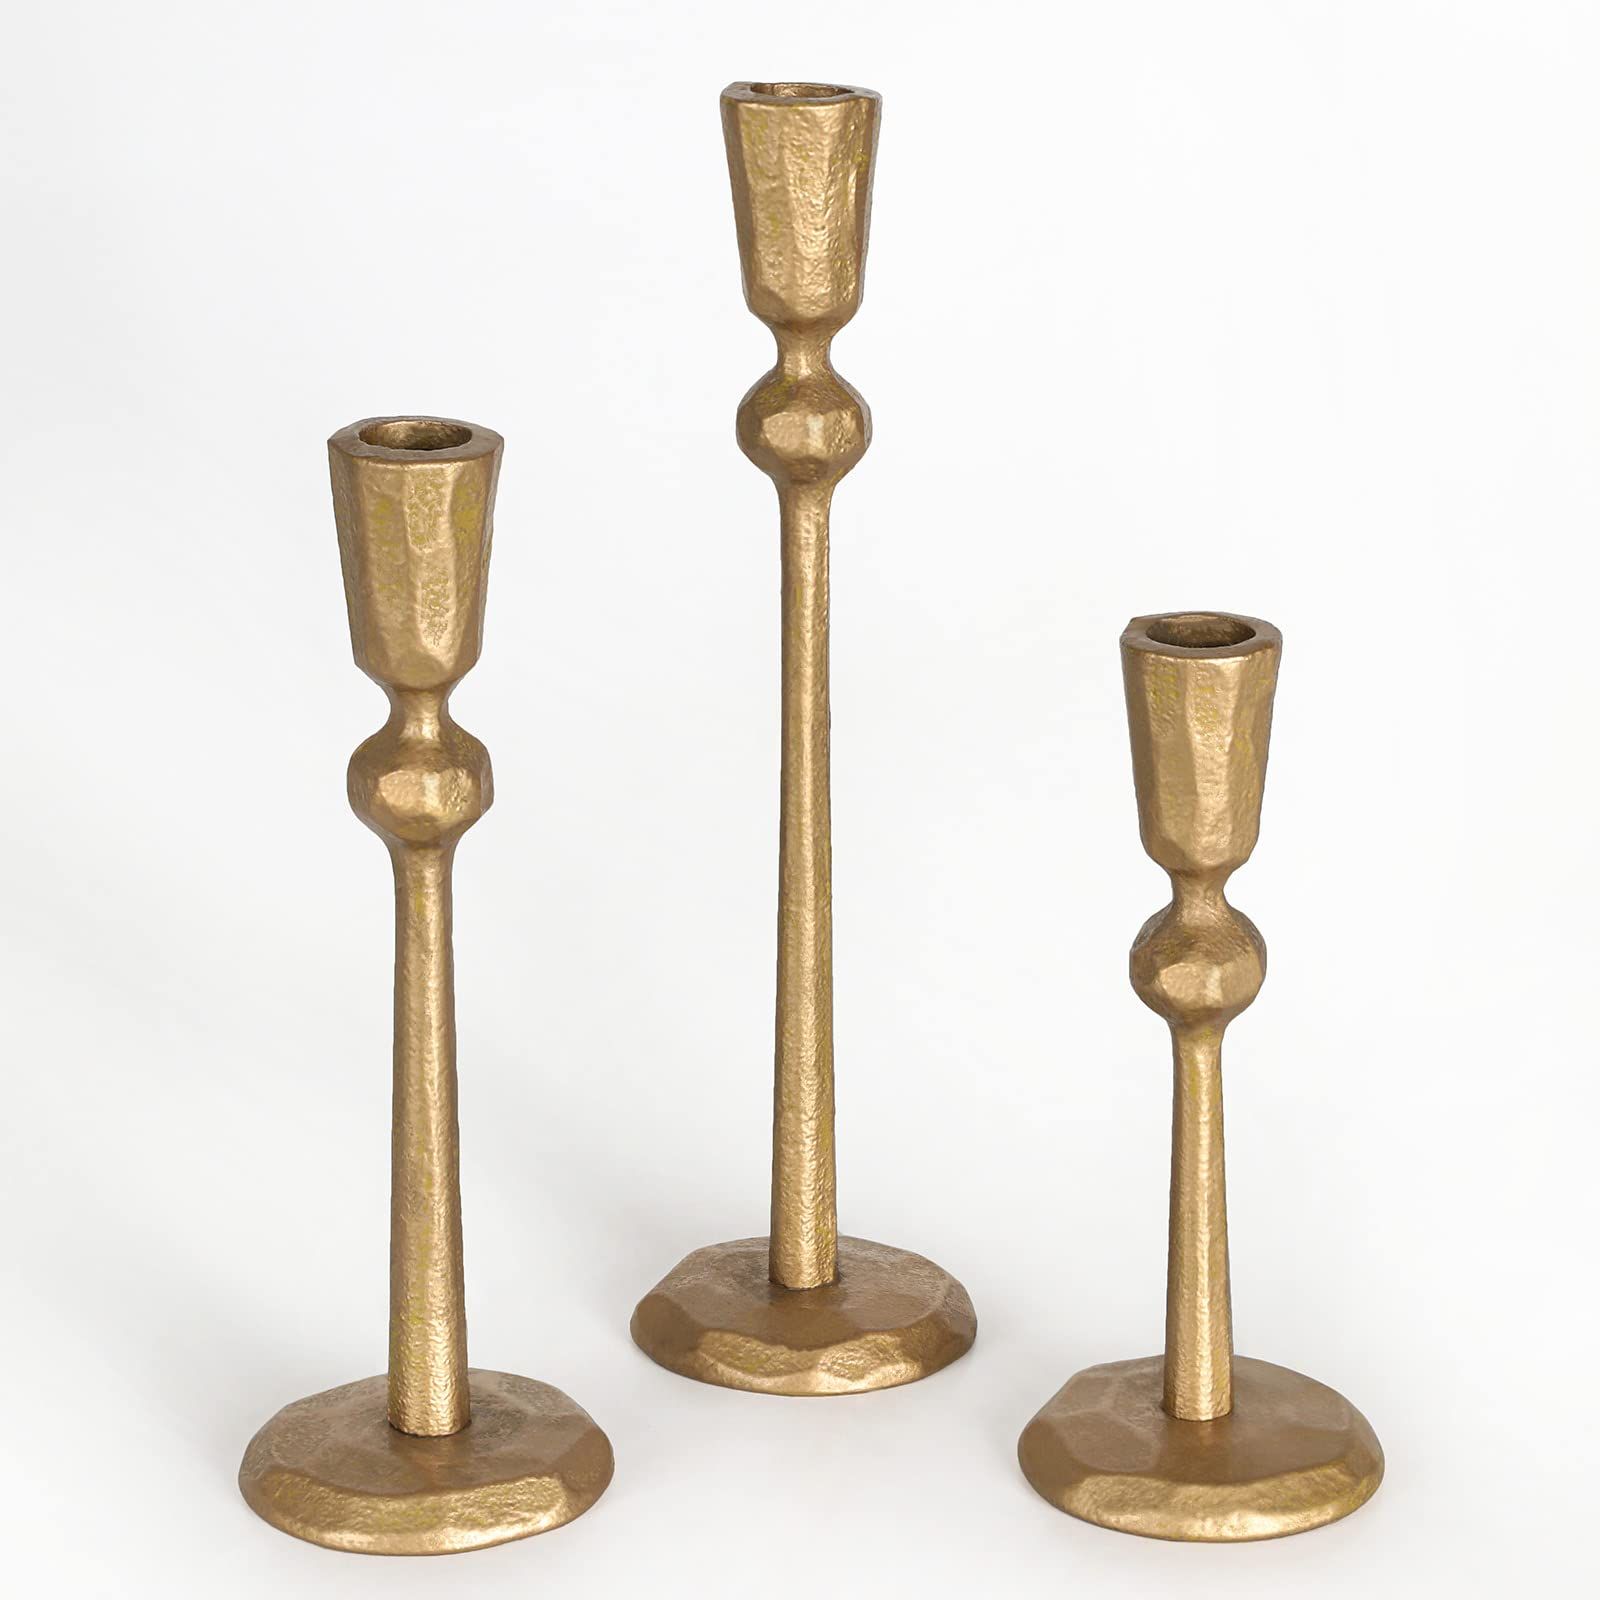 Antique Brass Iron Taper Candle Holder - Set of 3 Decorative Candle Stand, Candlestick Holder for Wedding, Dinning, Party | Amazon (US)